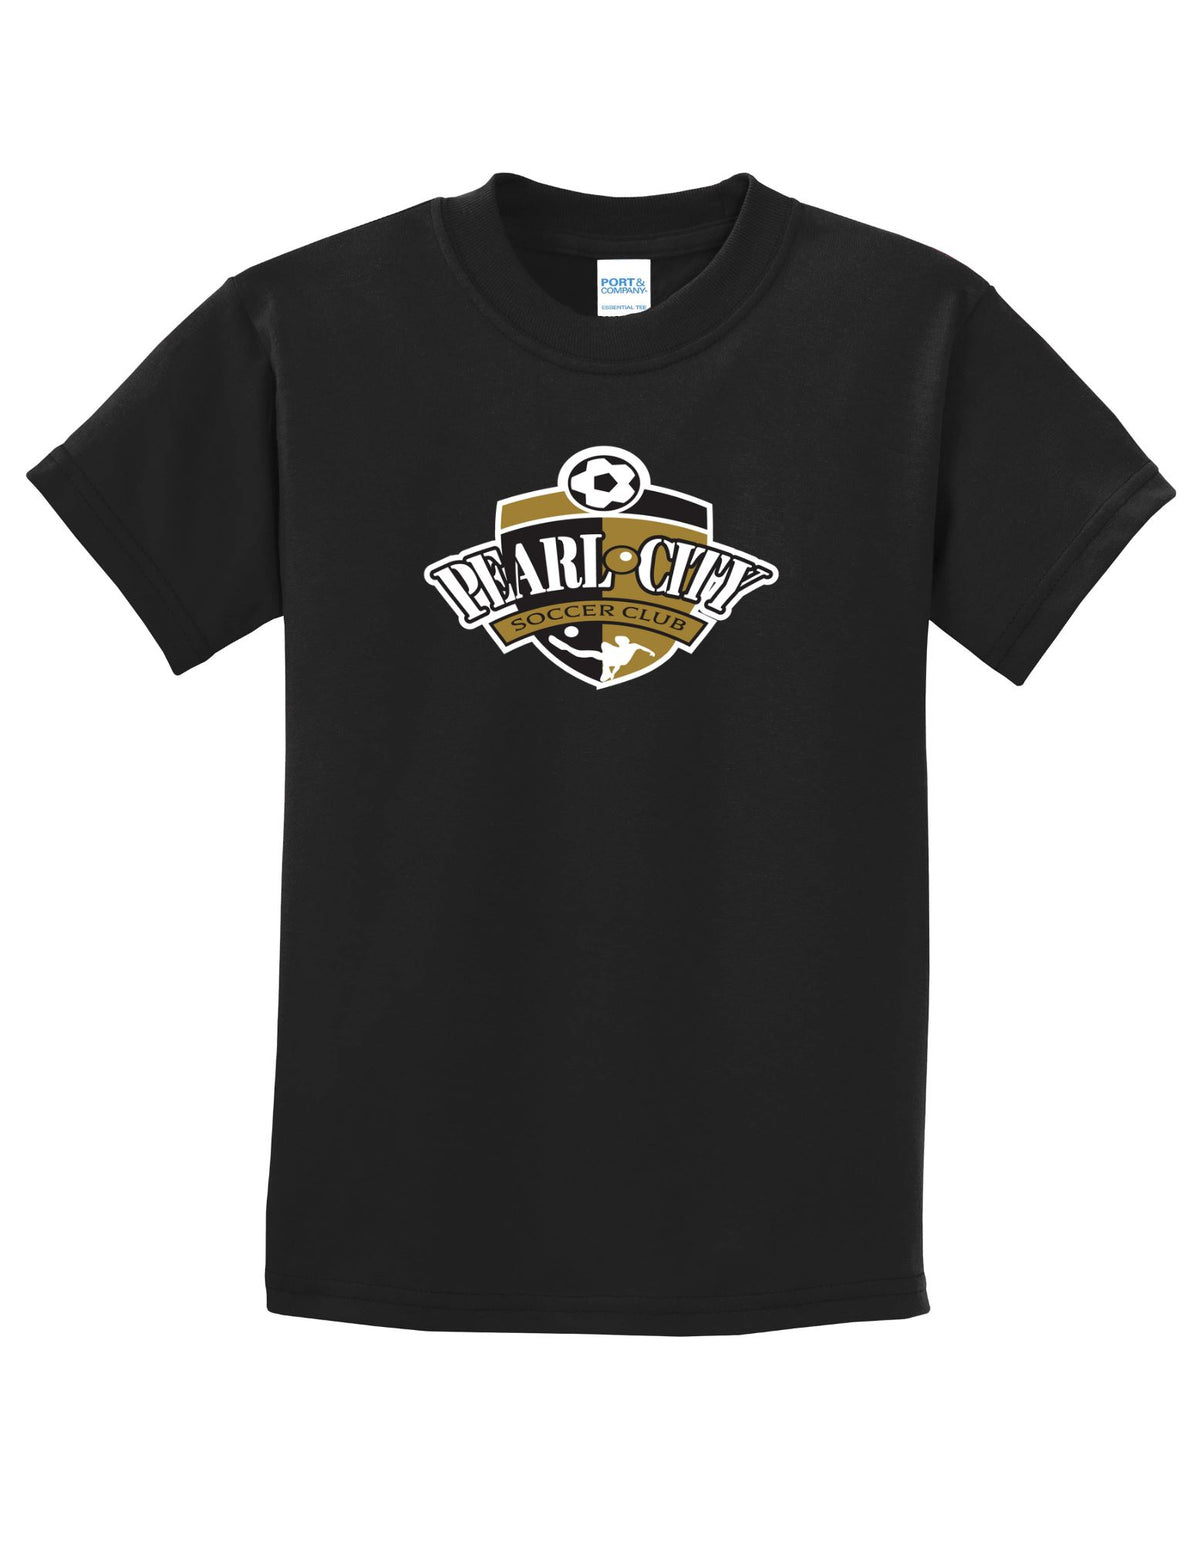 Pearl City Soccer Club Youth Tee Essential Tee Goal Kick Soccer Youth X-Small Jet Black 